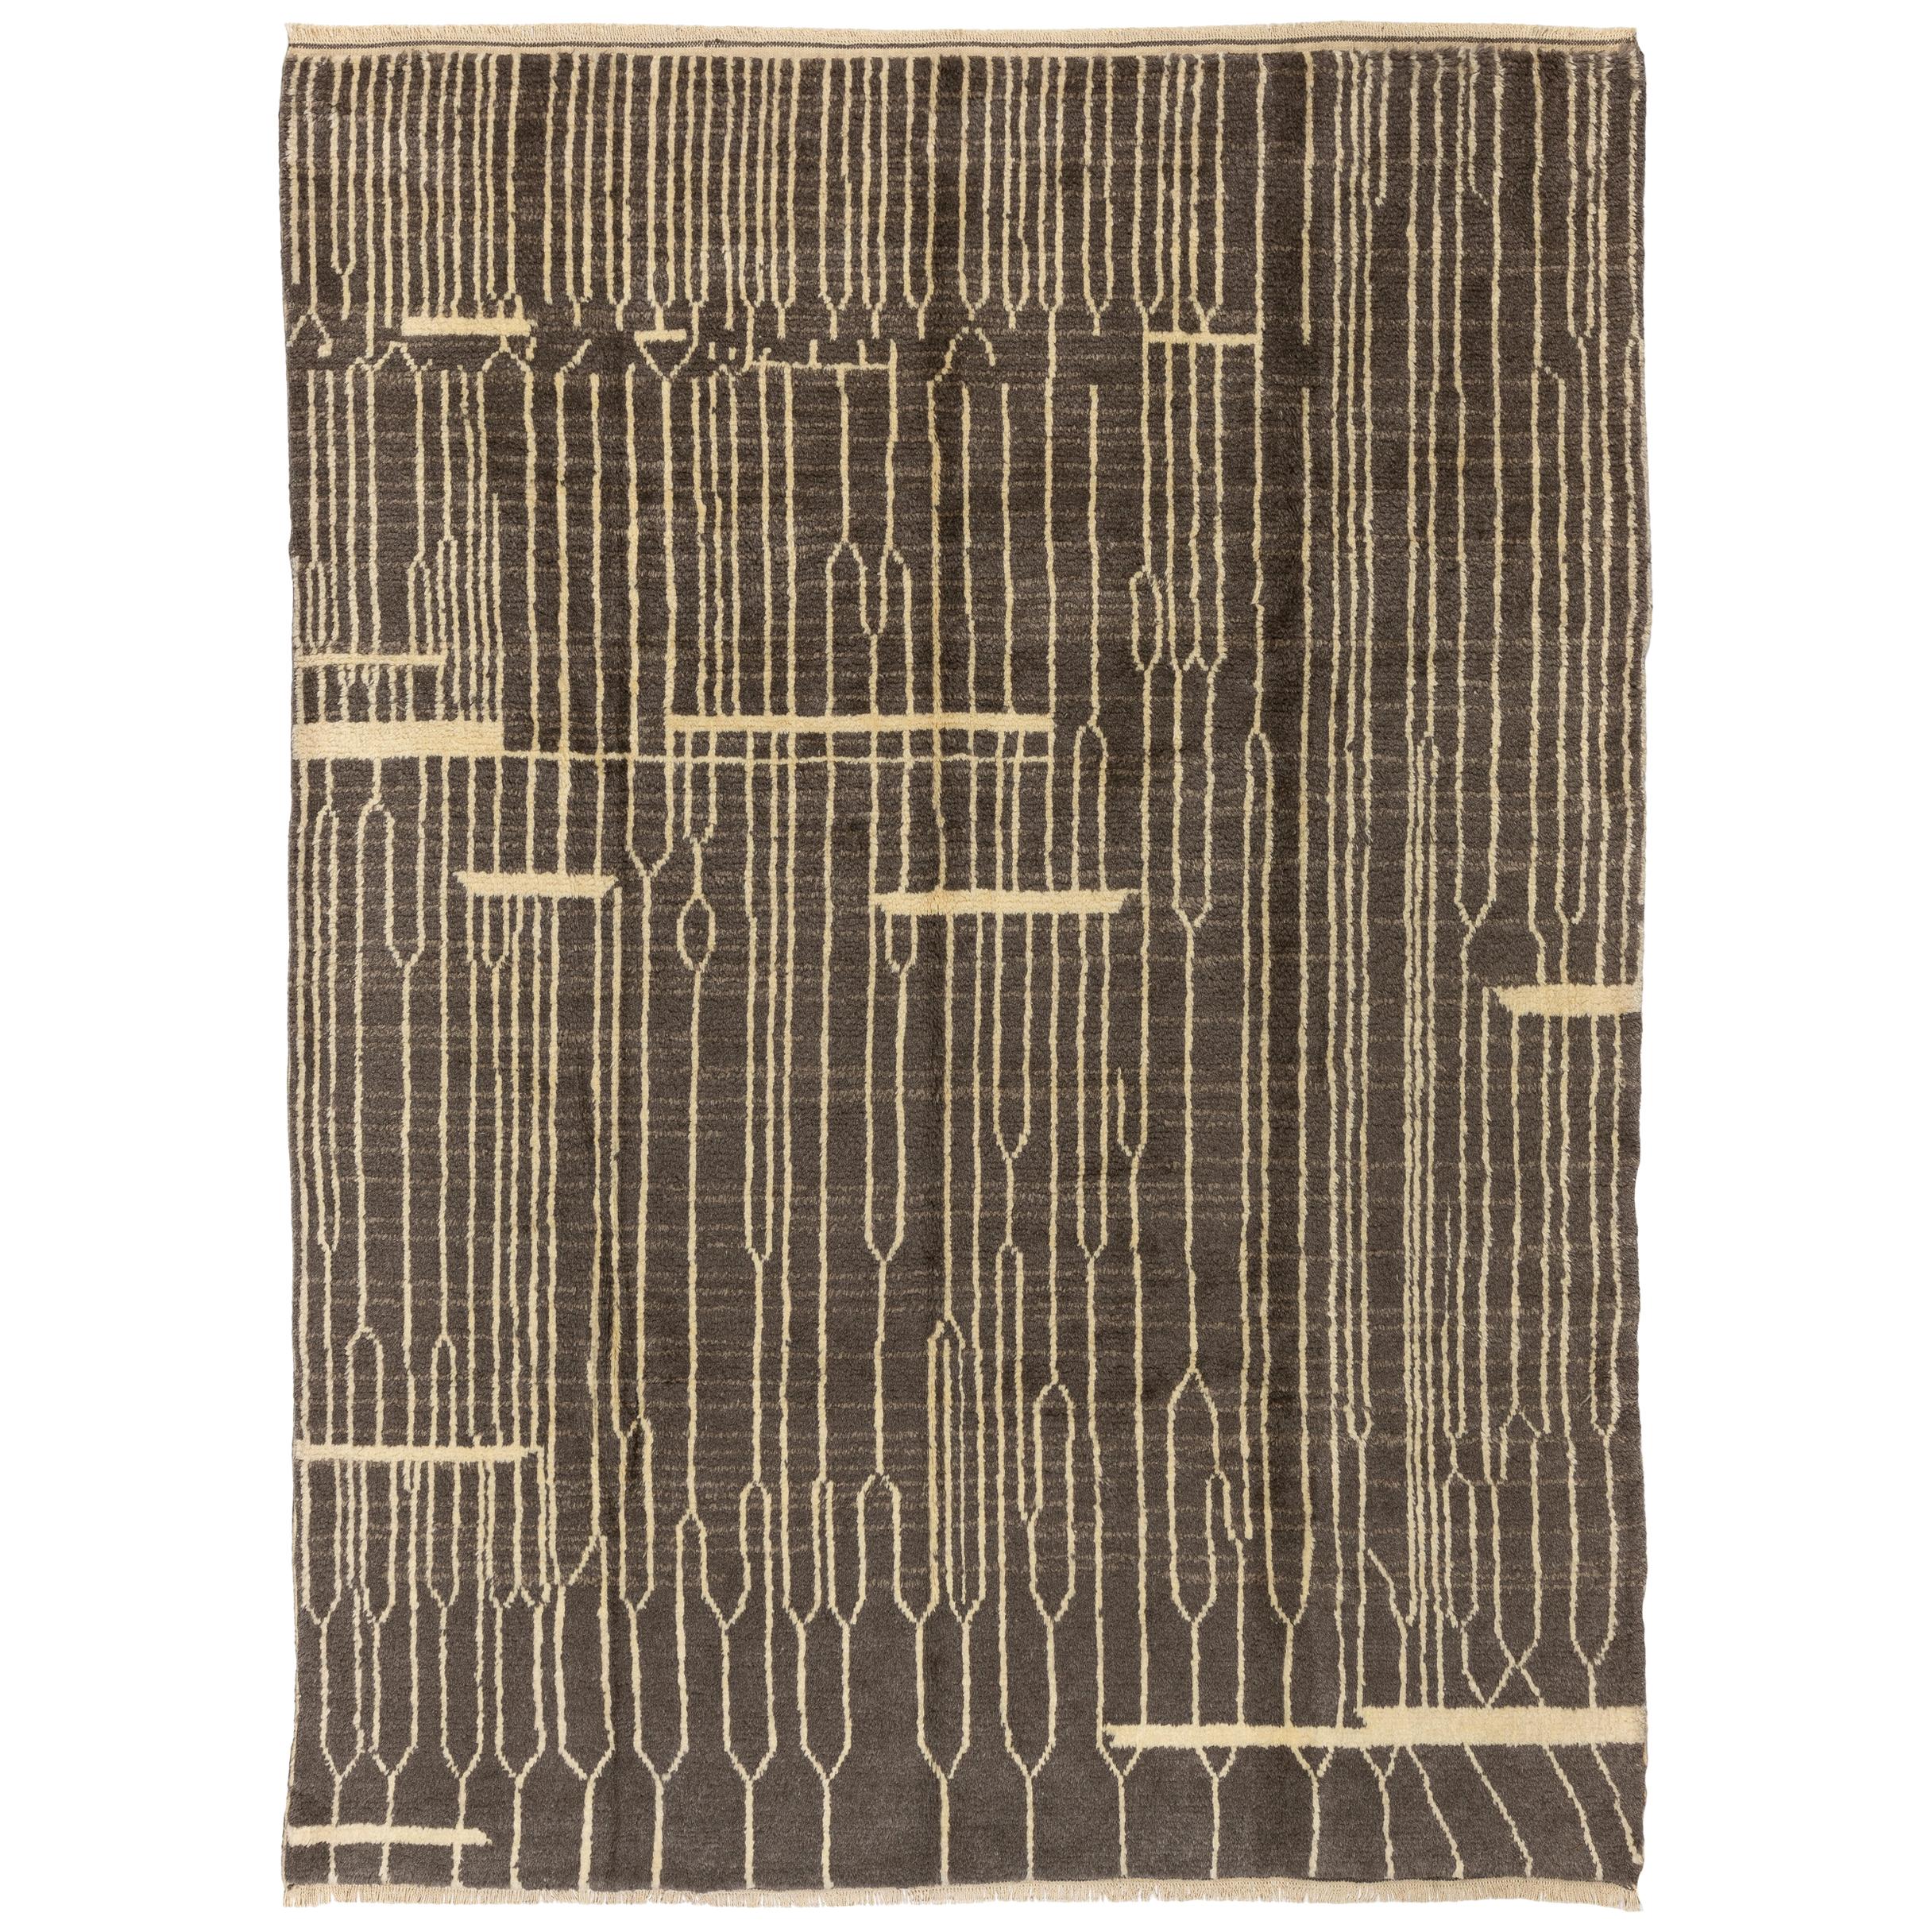 Custom Modern Hand Knotted Tulu Rug, Charcoal Gray and Cream Colors, 100% Wool